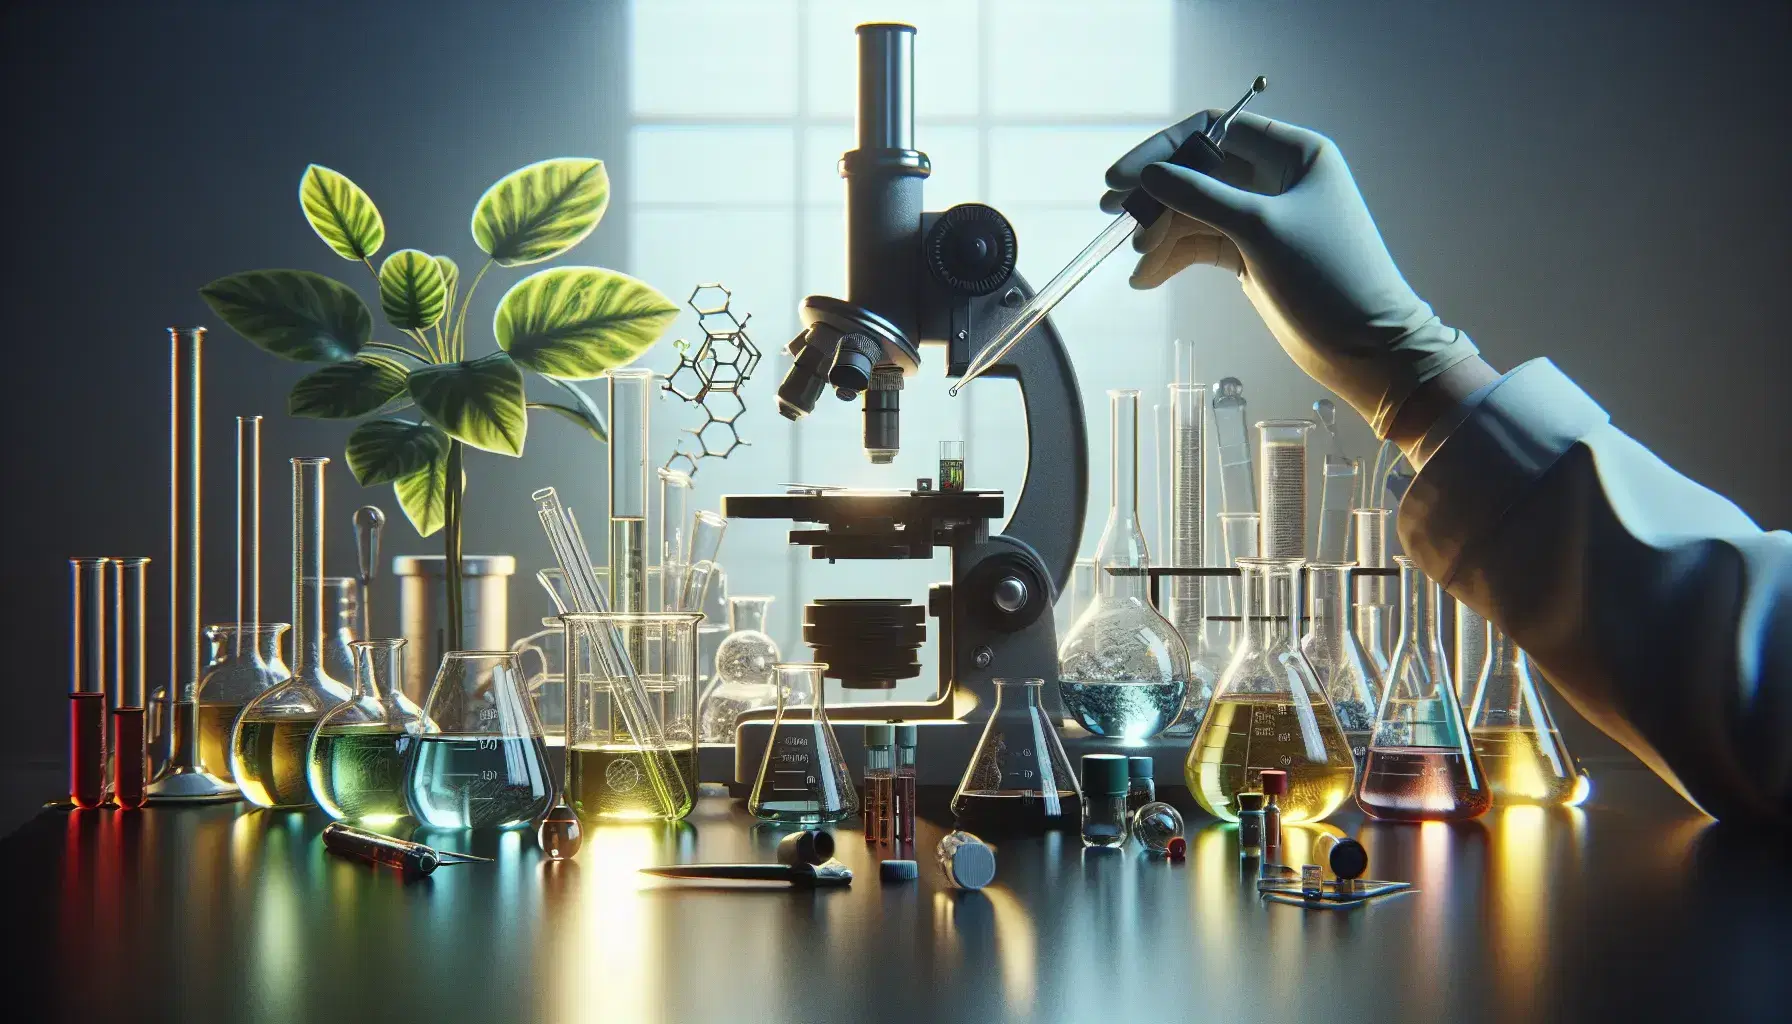 Science laboratory with workbench, glassware with colored liquids, microscope, green plant and gloved hands using pipette.